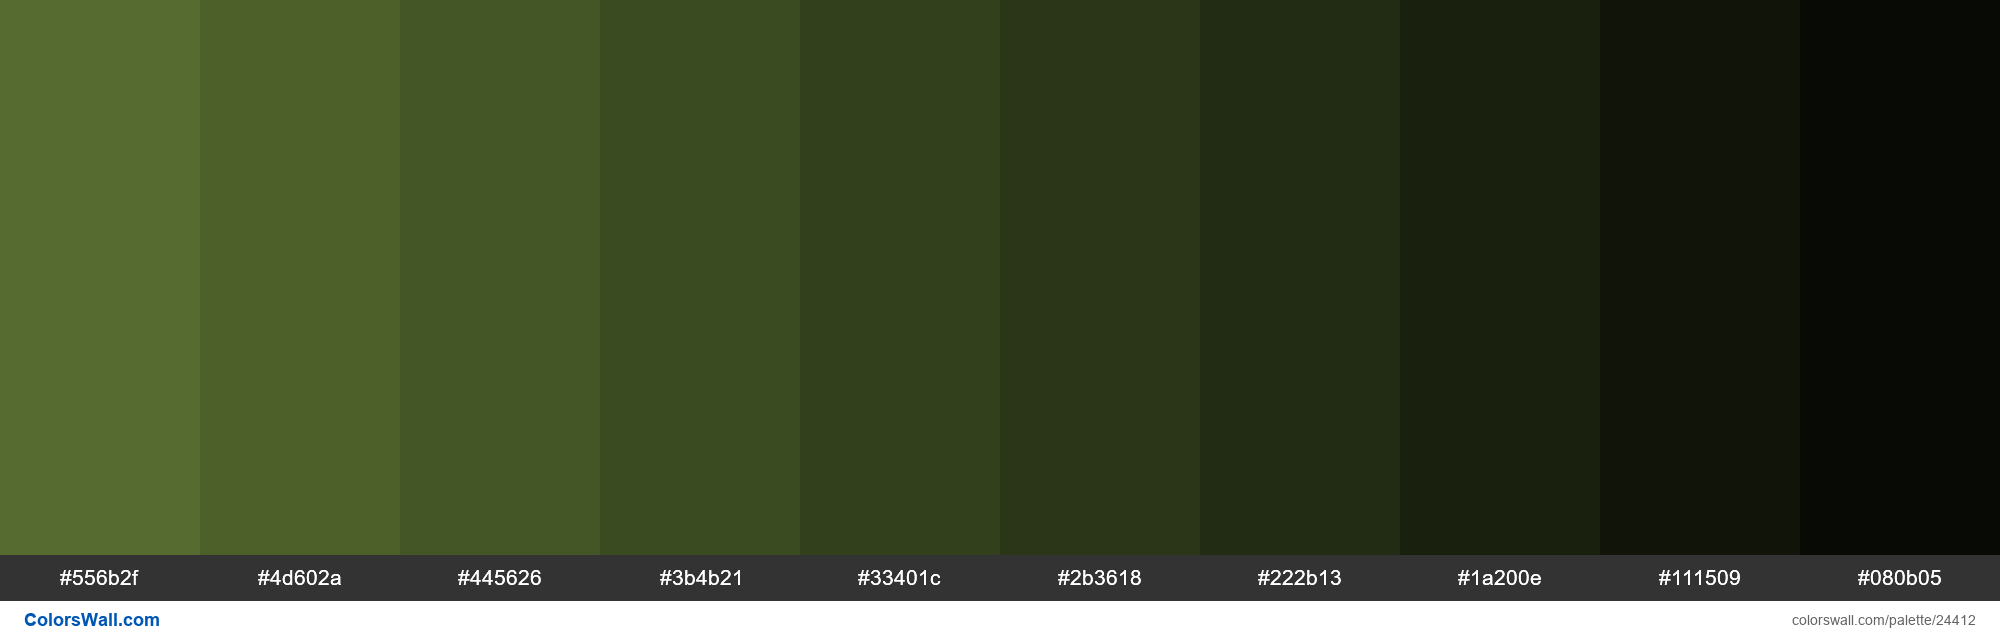 Shades Of Dark Olive Green 556b2f Hex Color 24412 Colorswall 